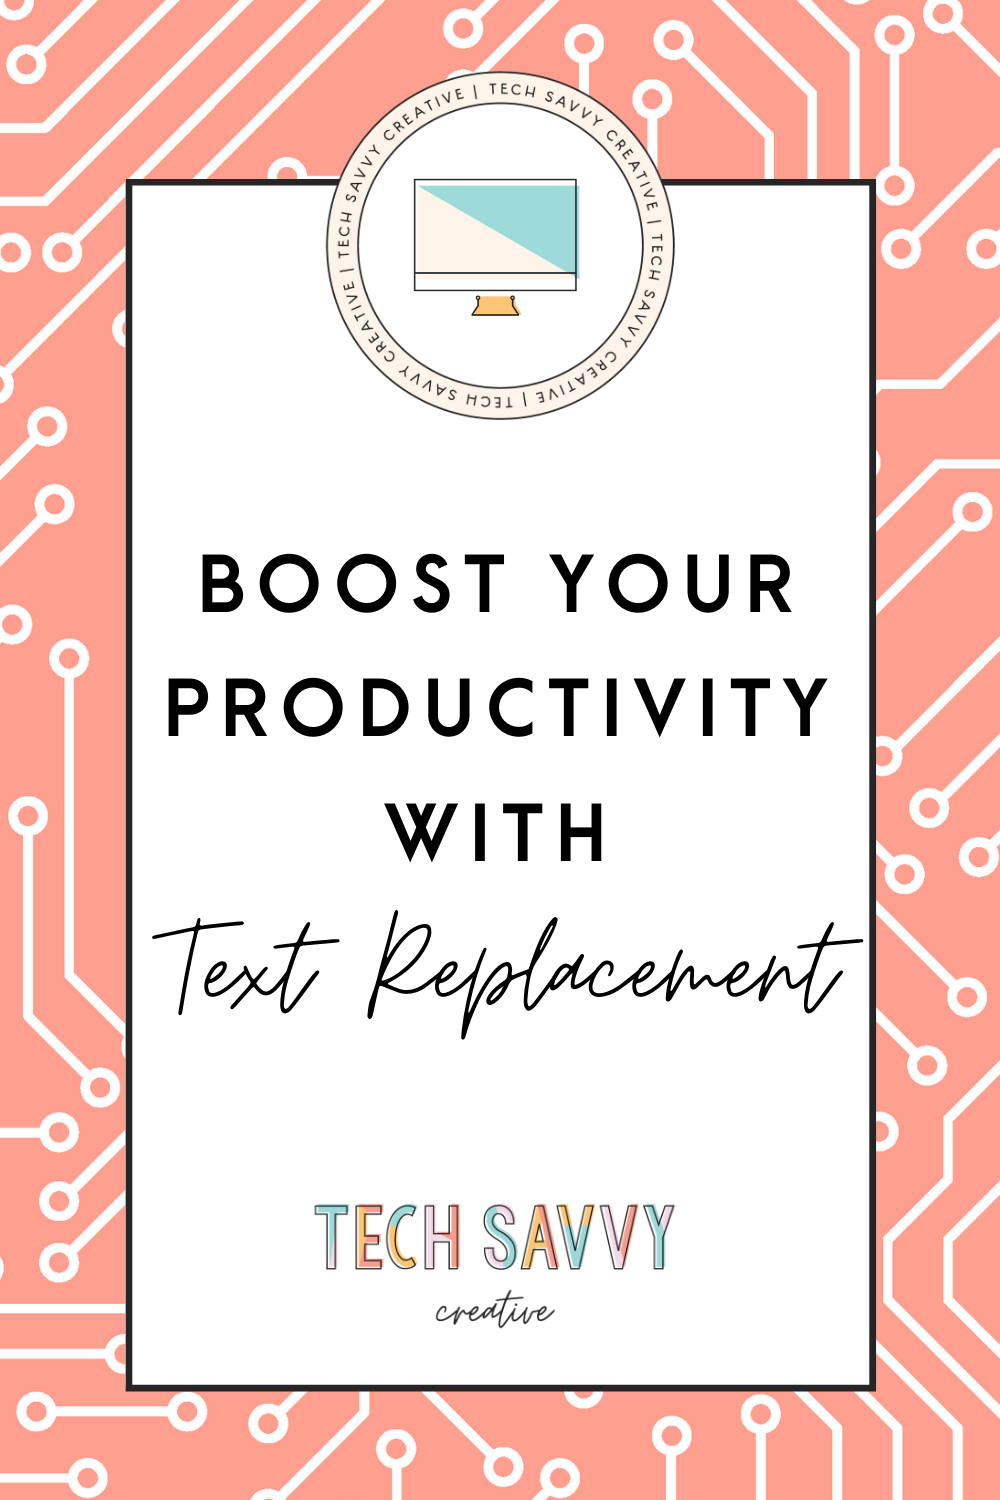 Learn How to use Text Replacement to boost your productivity with the help of Tech Savvy Creative